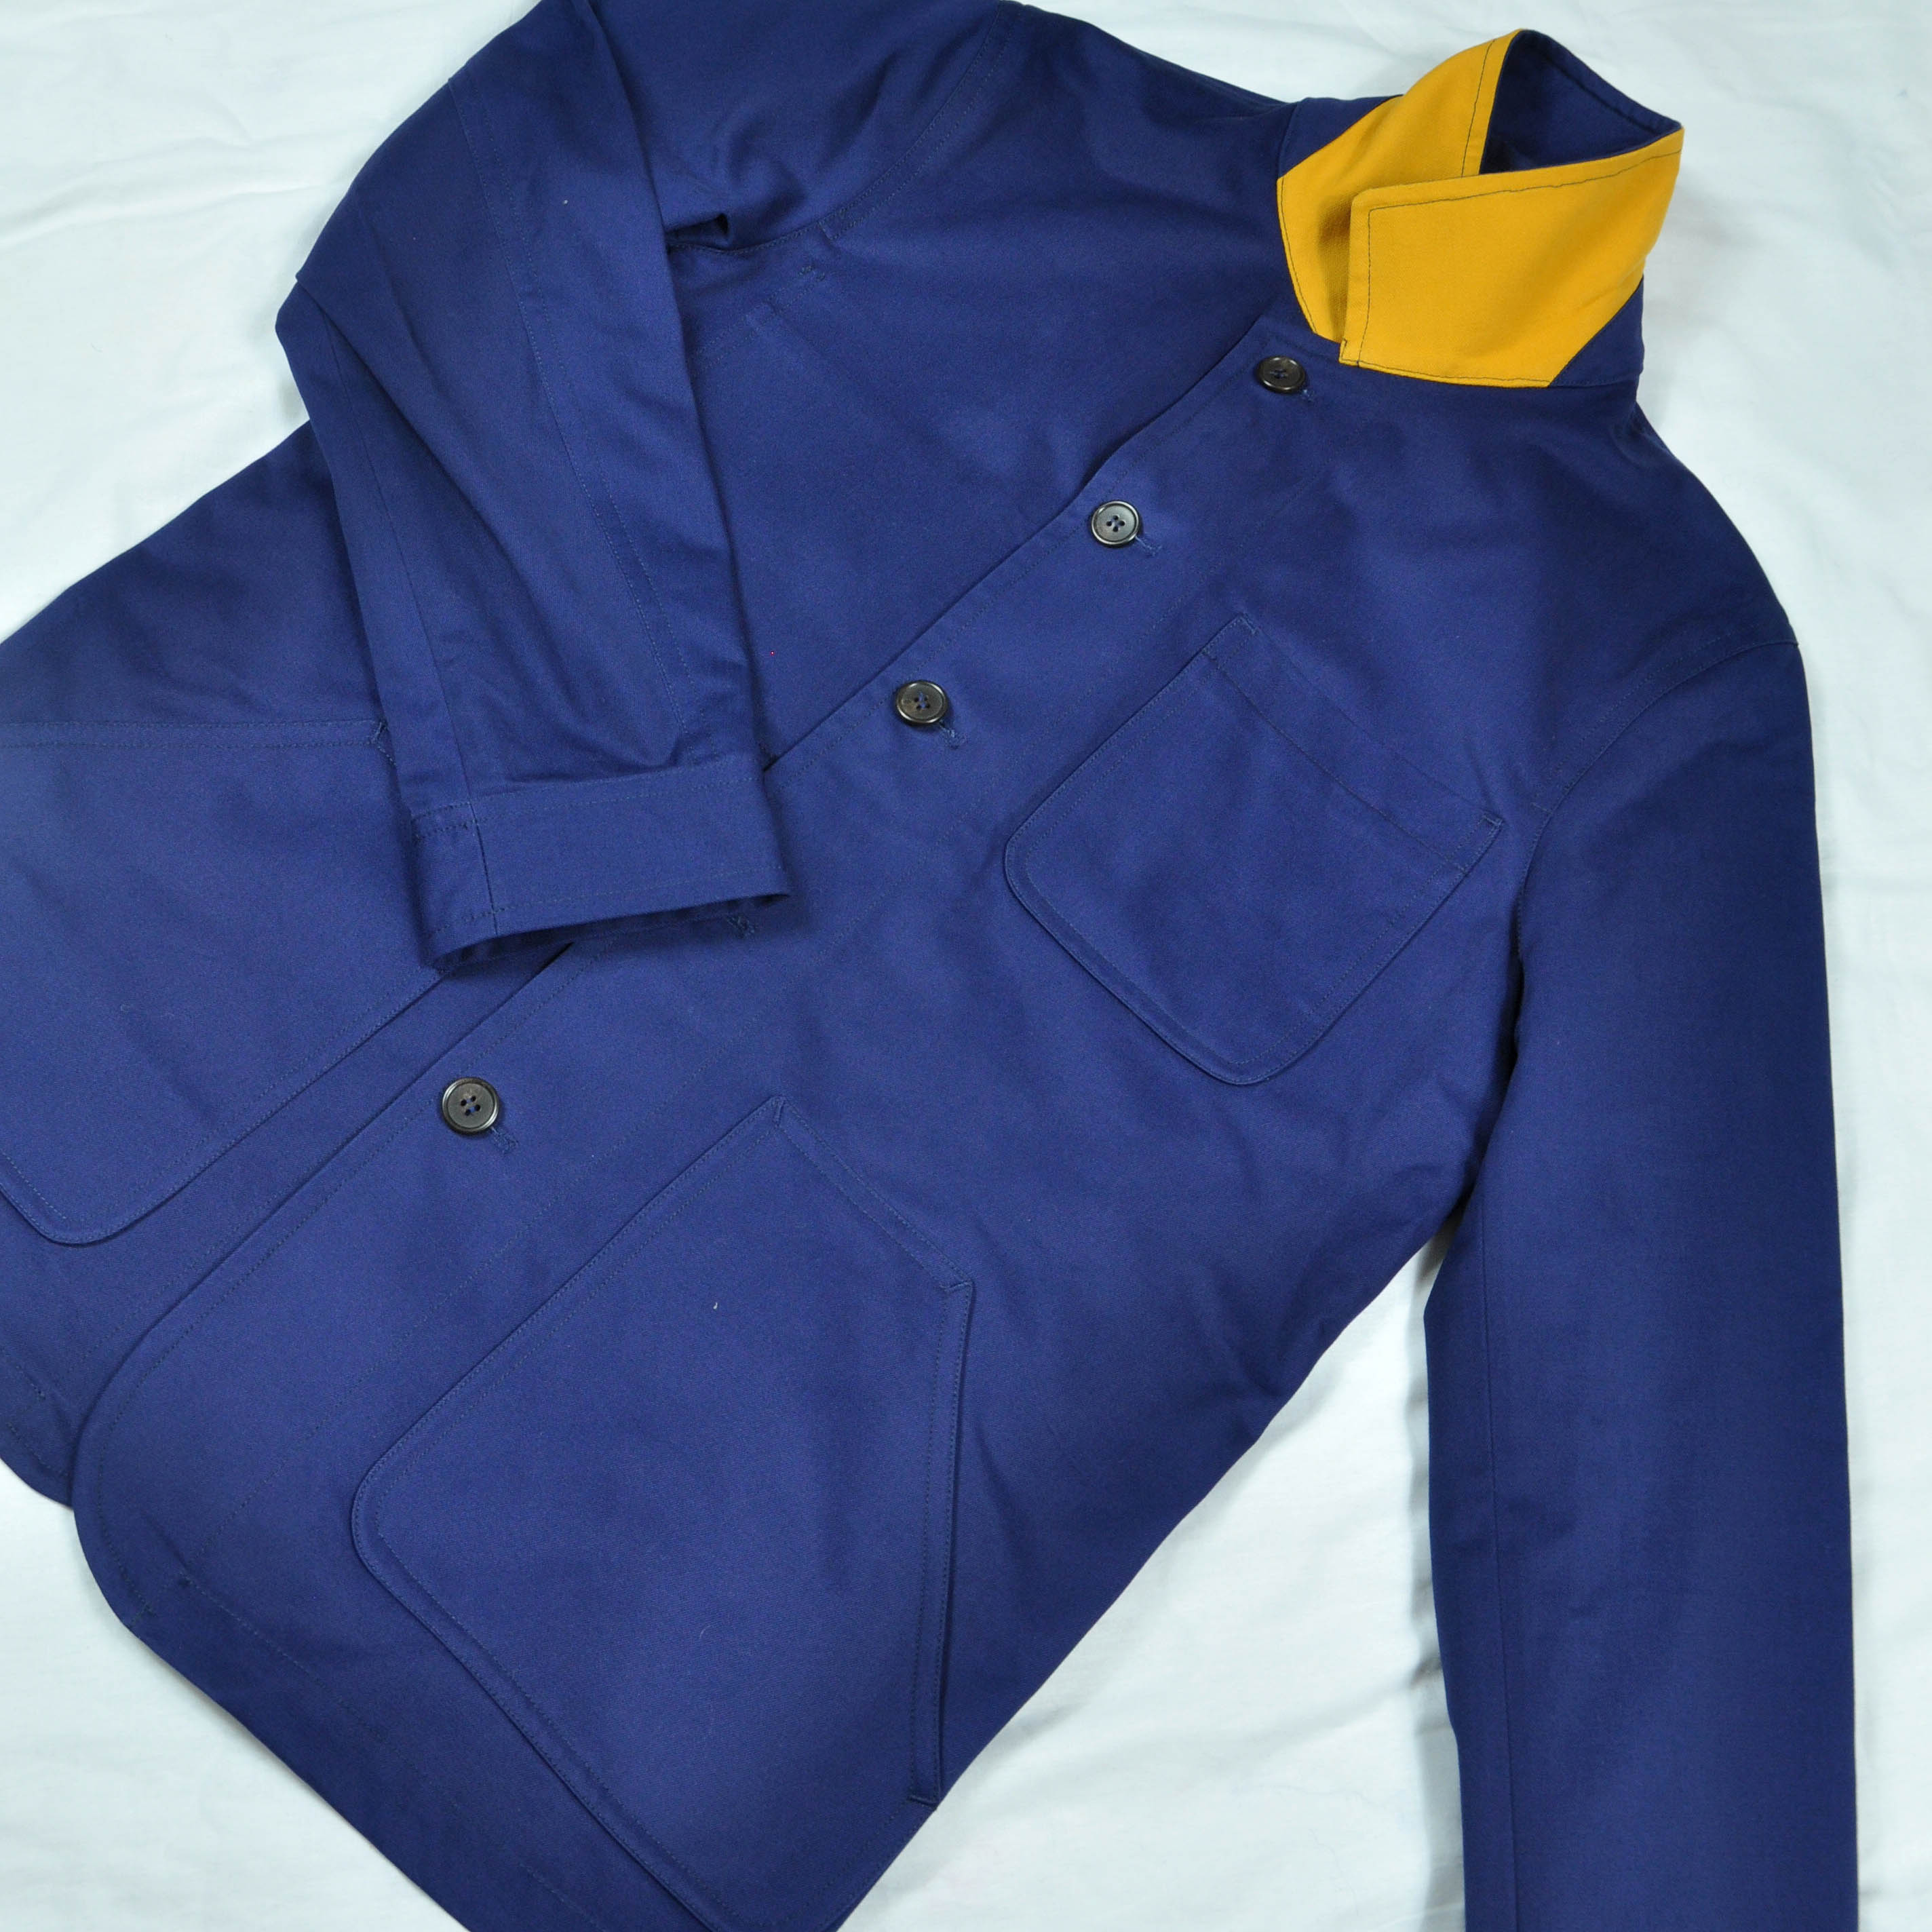 Heavy Cotton Worker Jacket in Royal Blue with Mustard (under) Collar